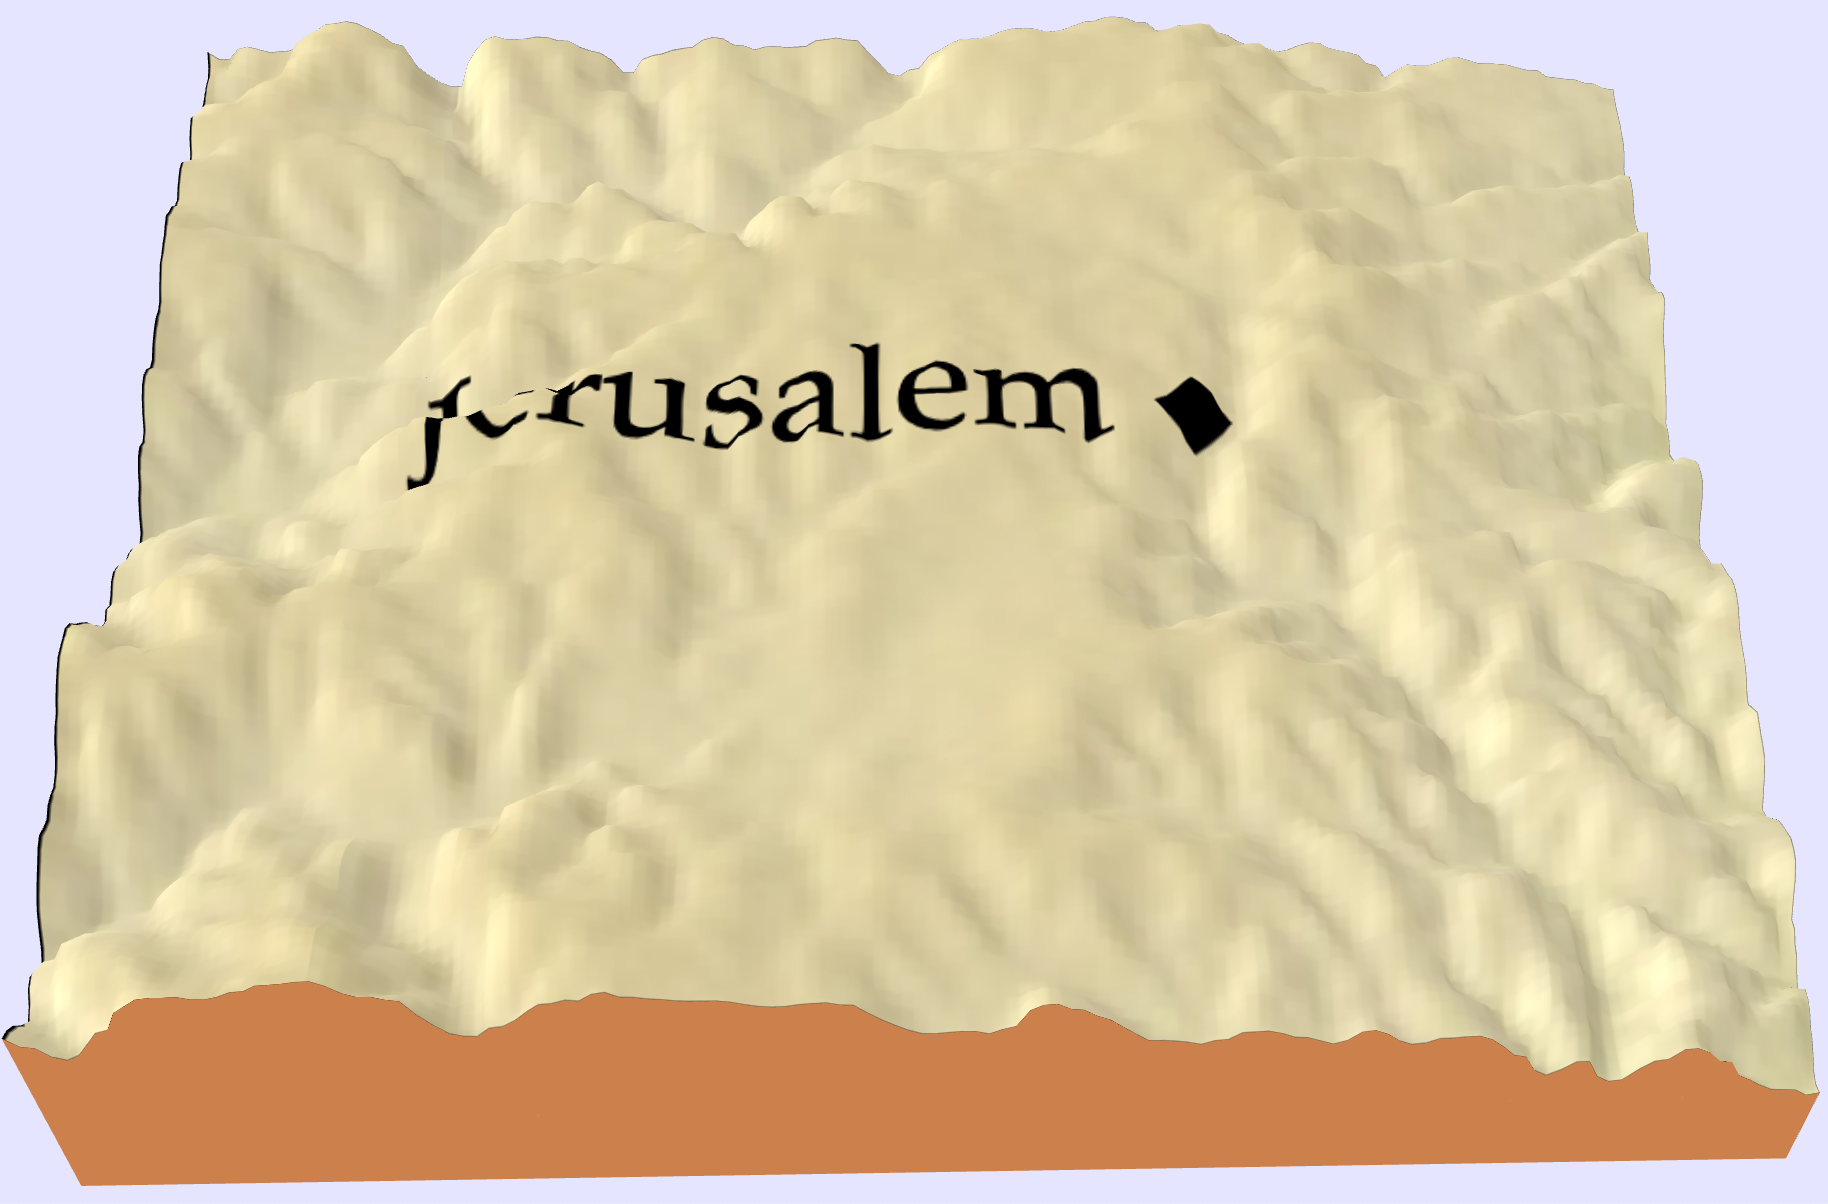 A topographic map of Jerusalem and the surrounding valleys and mountains.